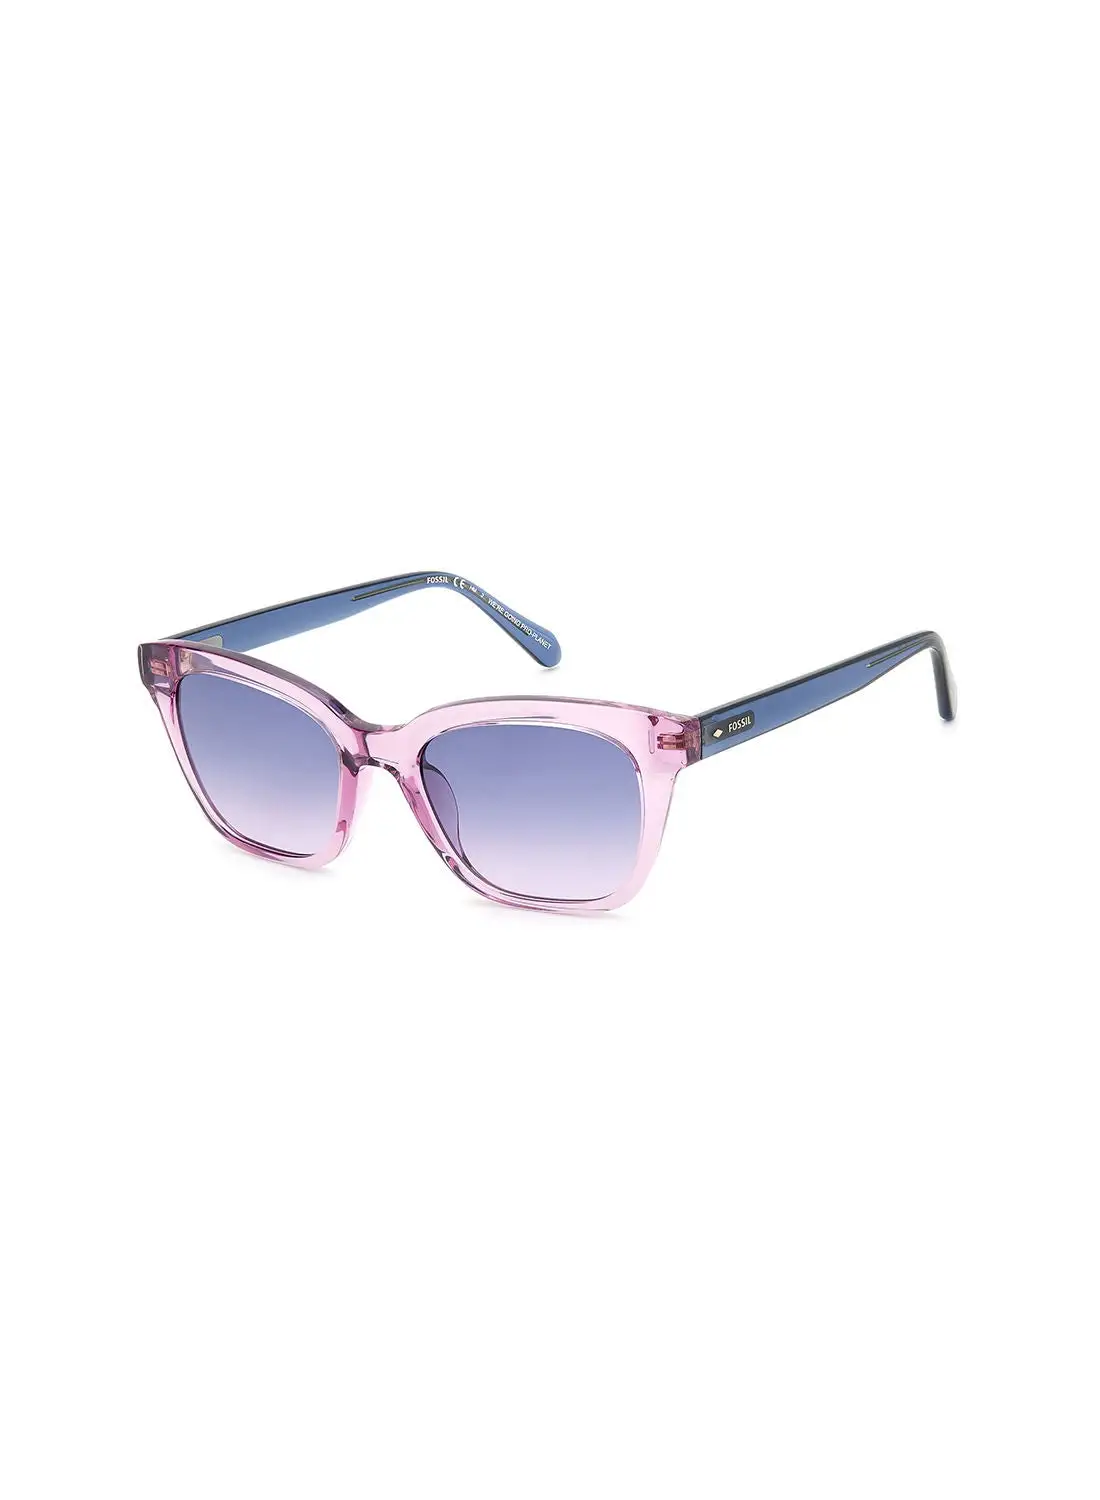 FOSSIL Women's UV Protection Square Sunglasses - Fos 2126/G/S Lilac 51 - Lens Size: 51 Mm